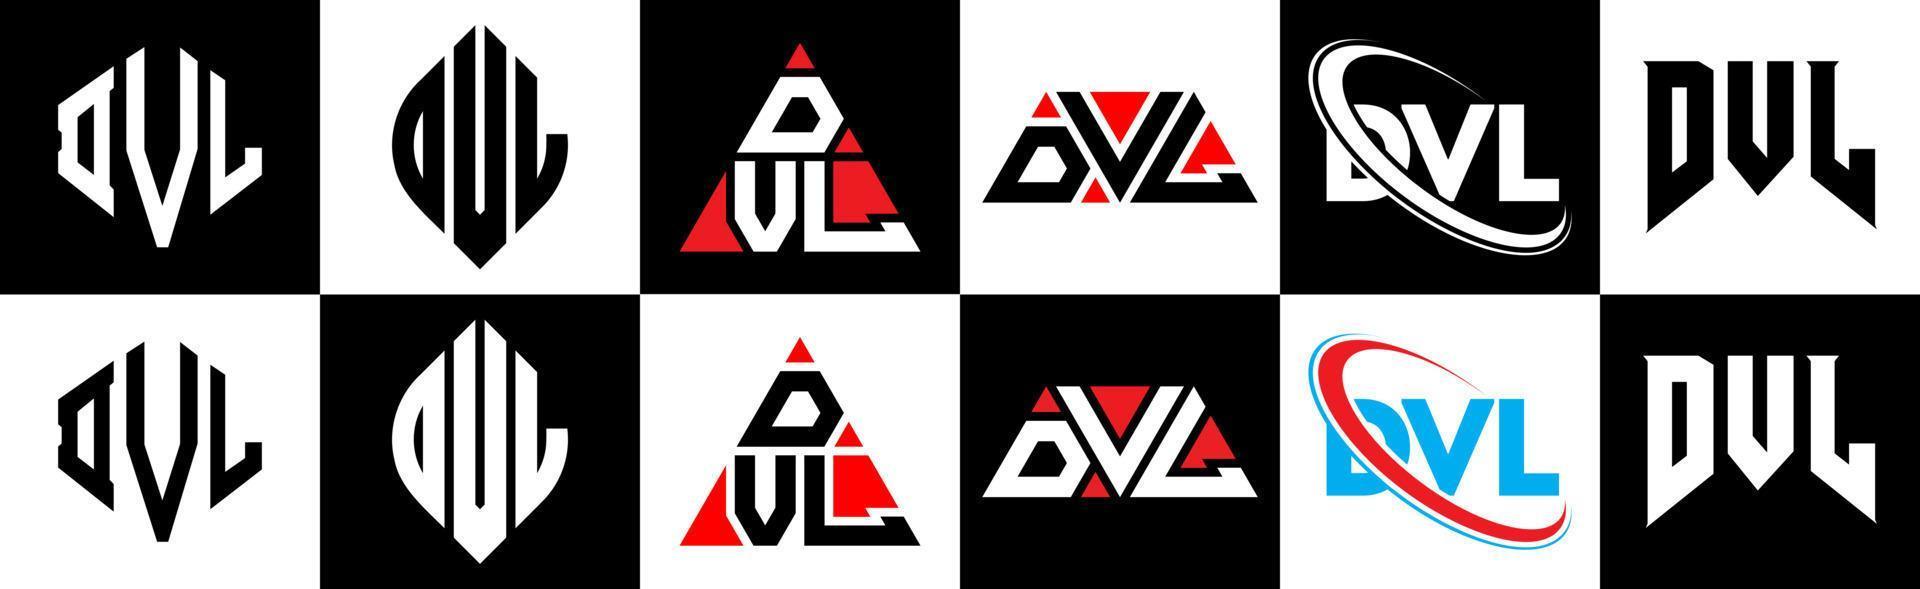 DVL letter logo design in six style. DVL polygon, circle, triangle, hexagon, flat and simple style with black and white color variation letter logo set in one artboard. DVL minimalist and classic logo vector